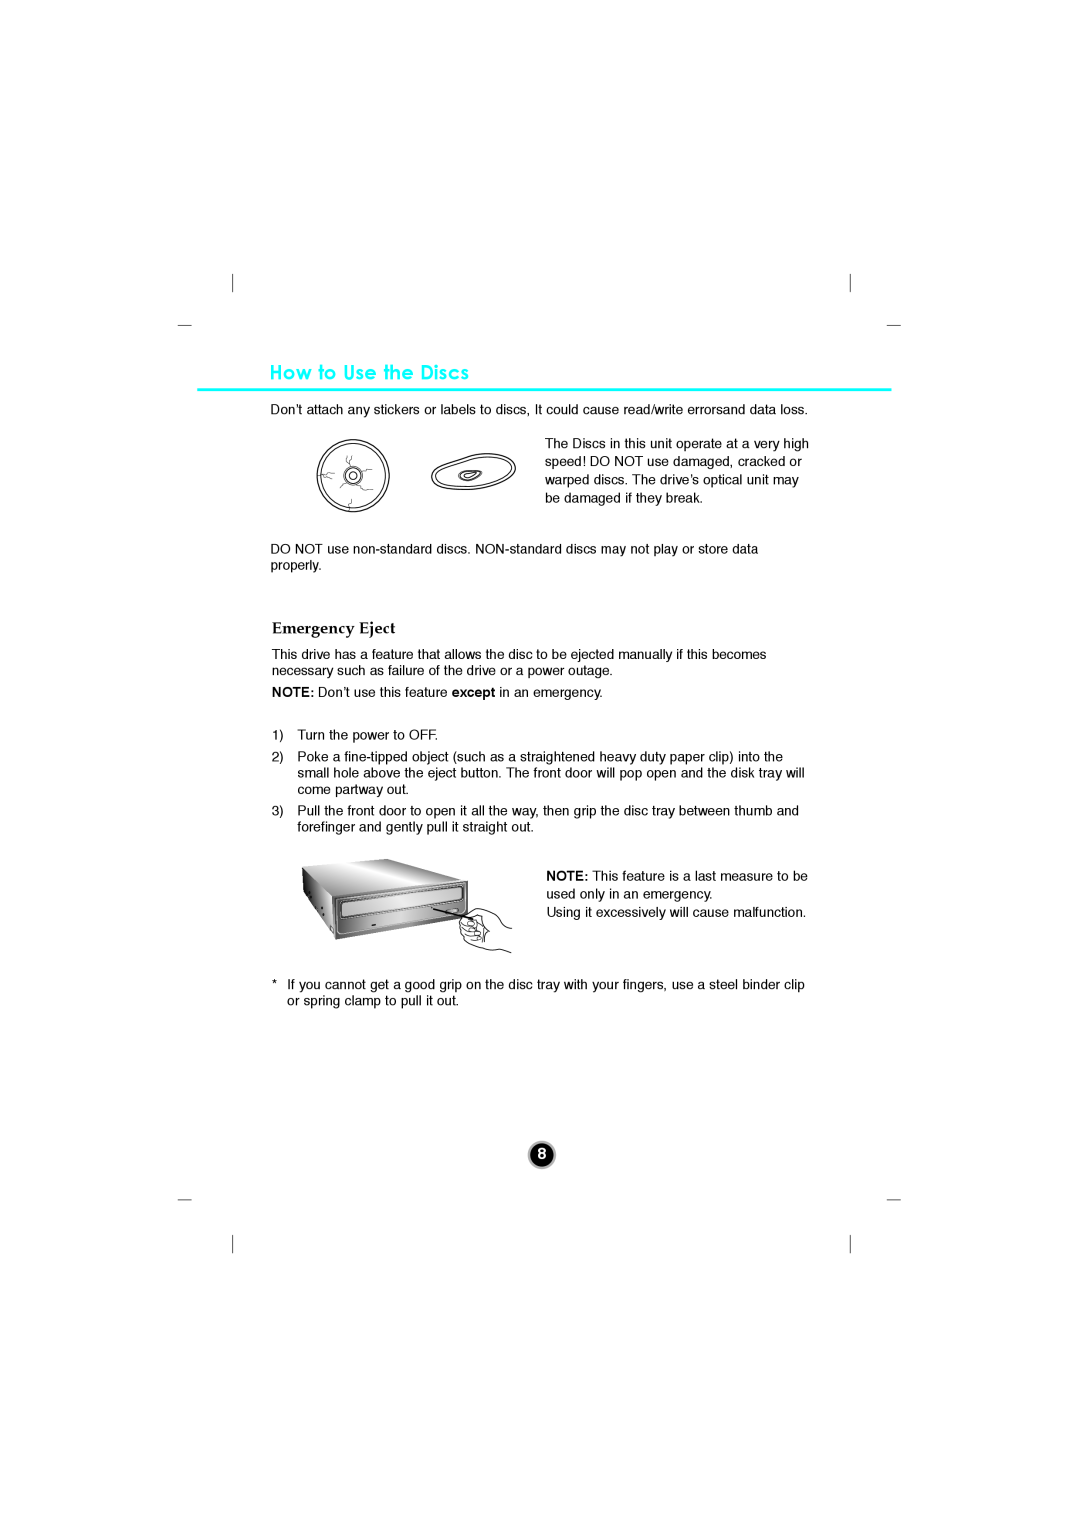 LG Electronics GGC-H20N, GGC-H20L owner manual How to Use the Discs, Emergency Eject 